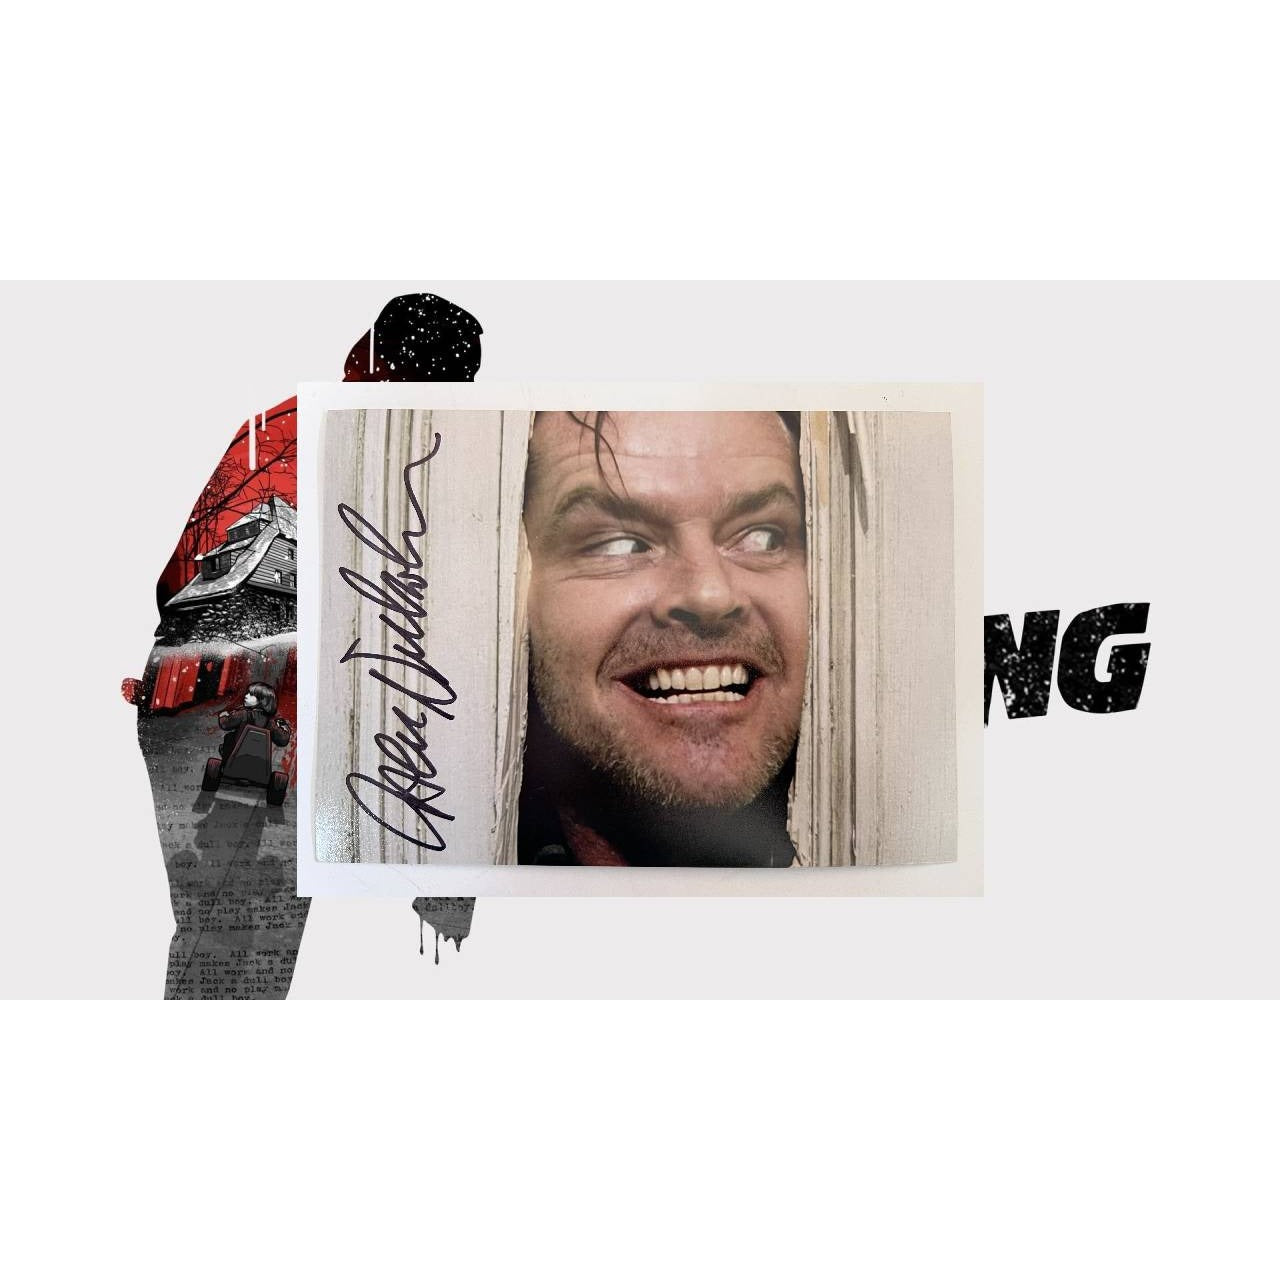 Jack Nicholson The Shining 5x7 photo signed with proof